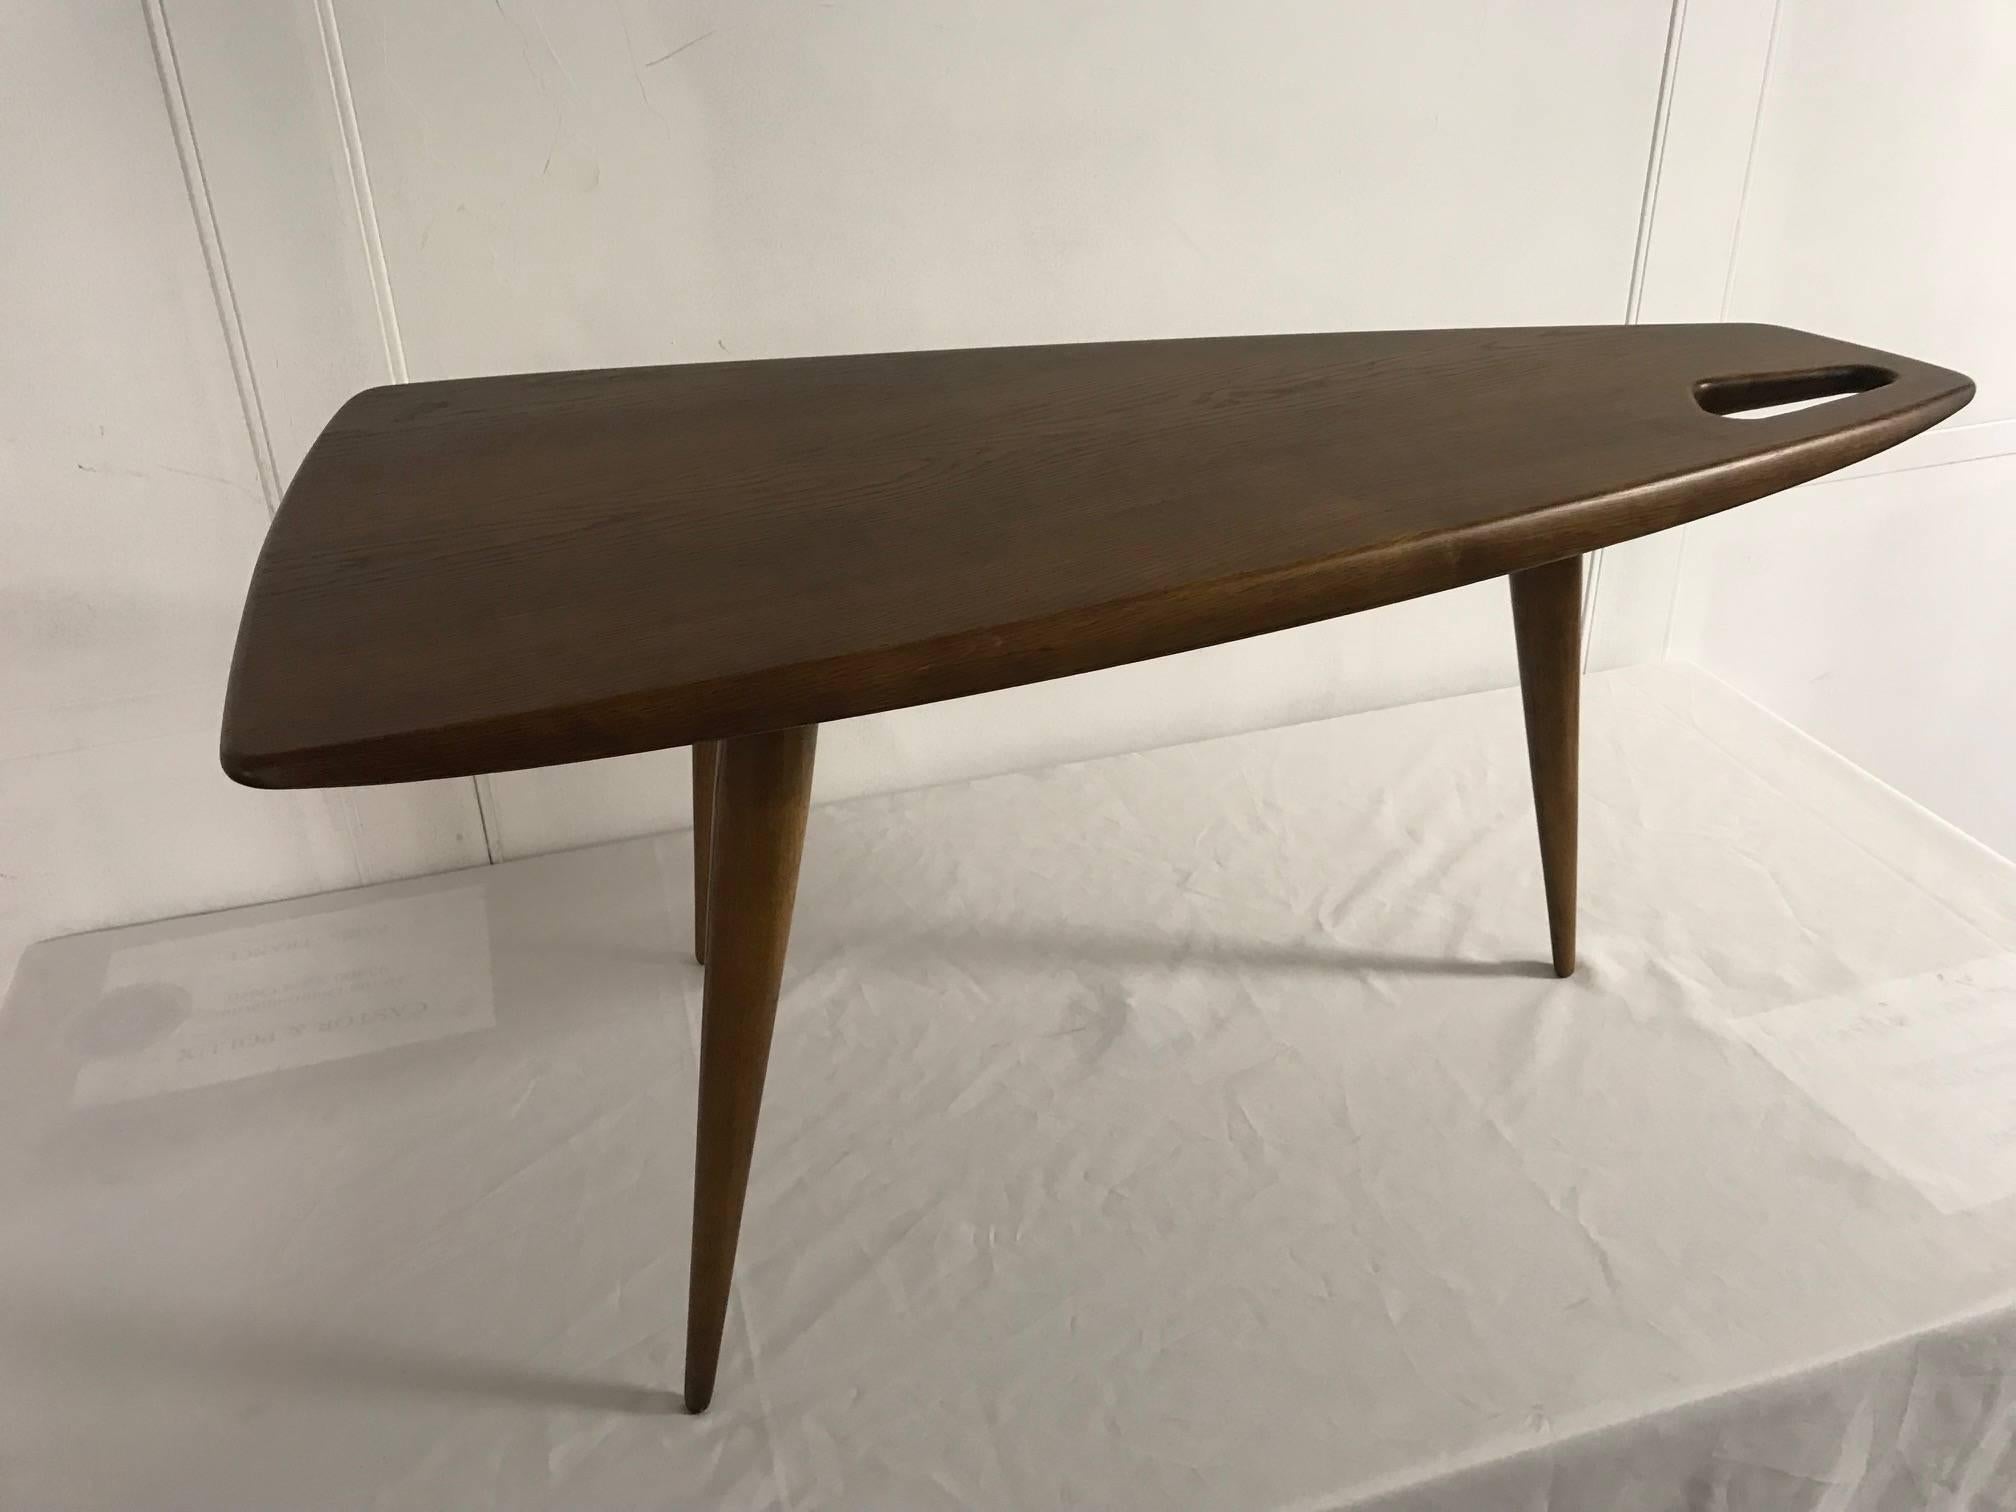 Walnut coffee table by Pierre Cruège (for the Formes society he created in the early 1950s).